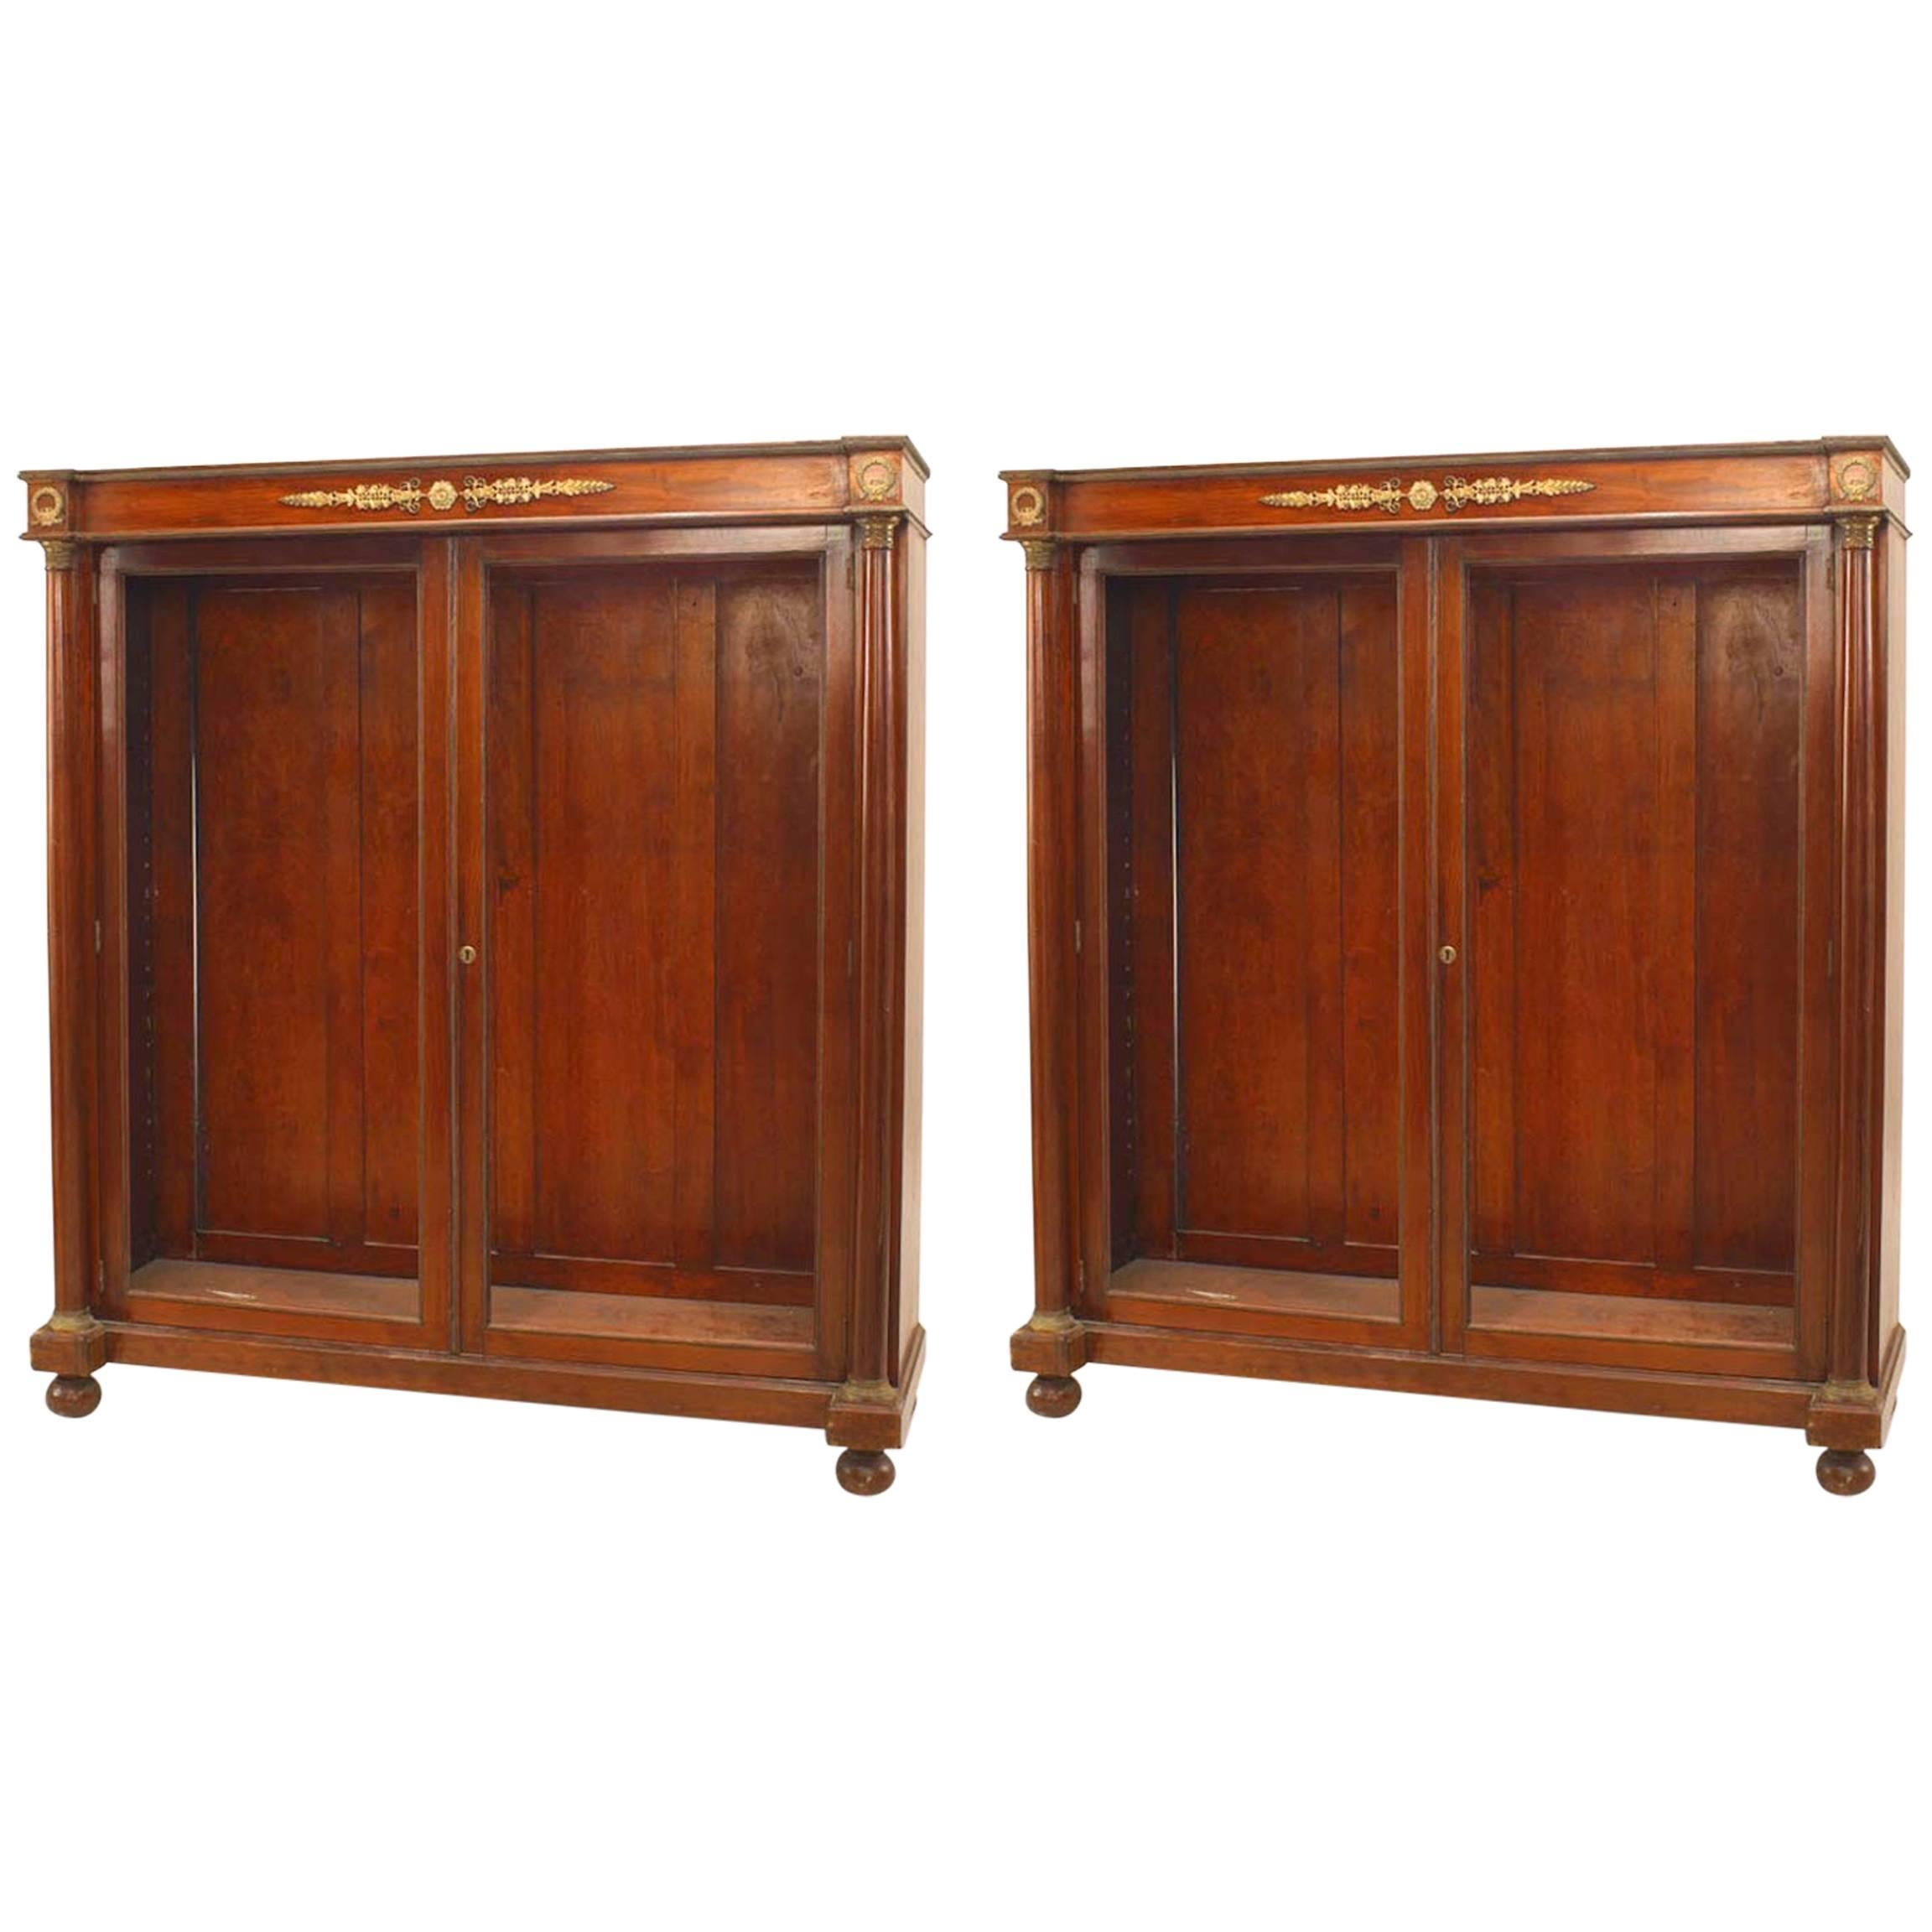 Pair of French Empire Mahogany and Bronze Bookcases